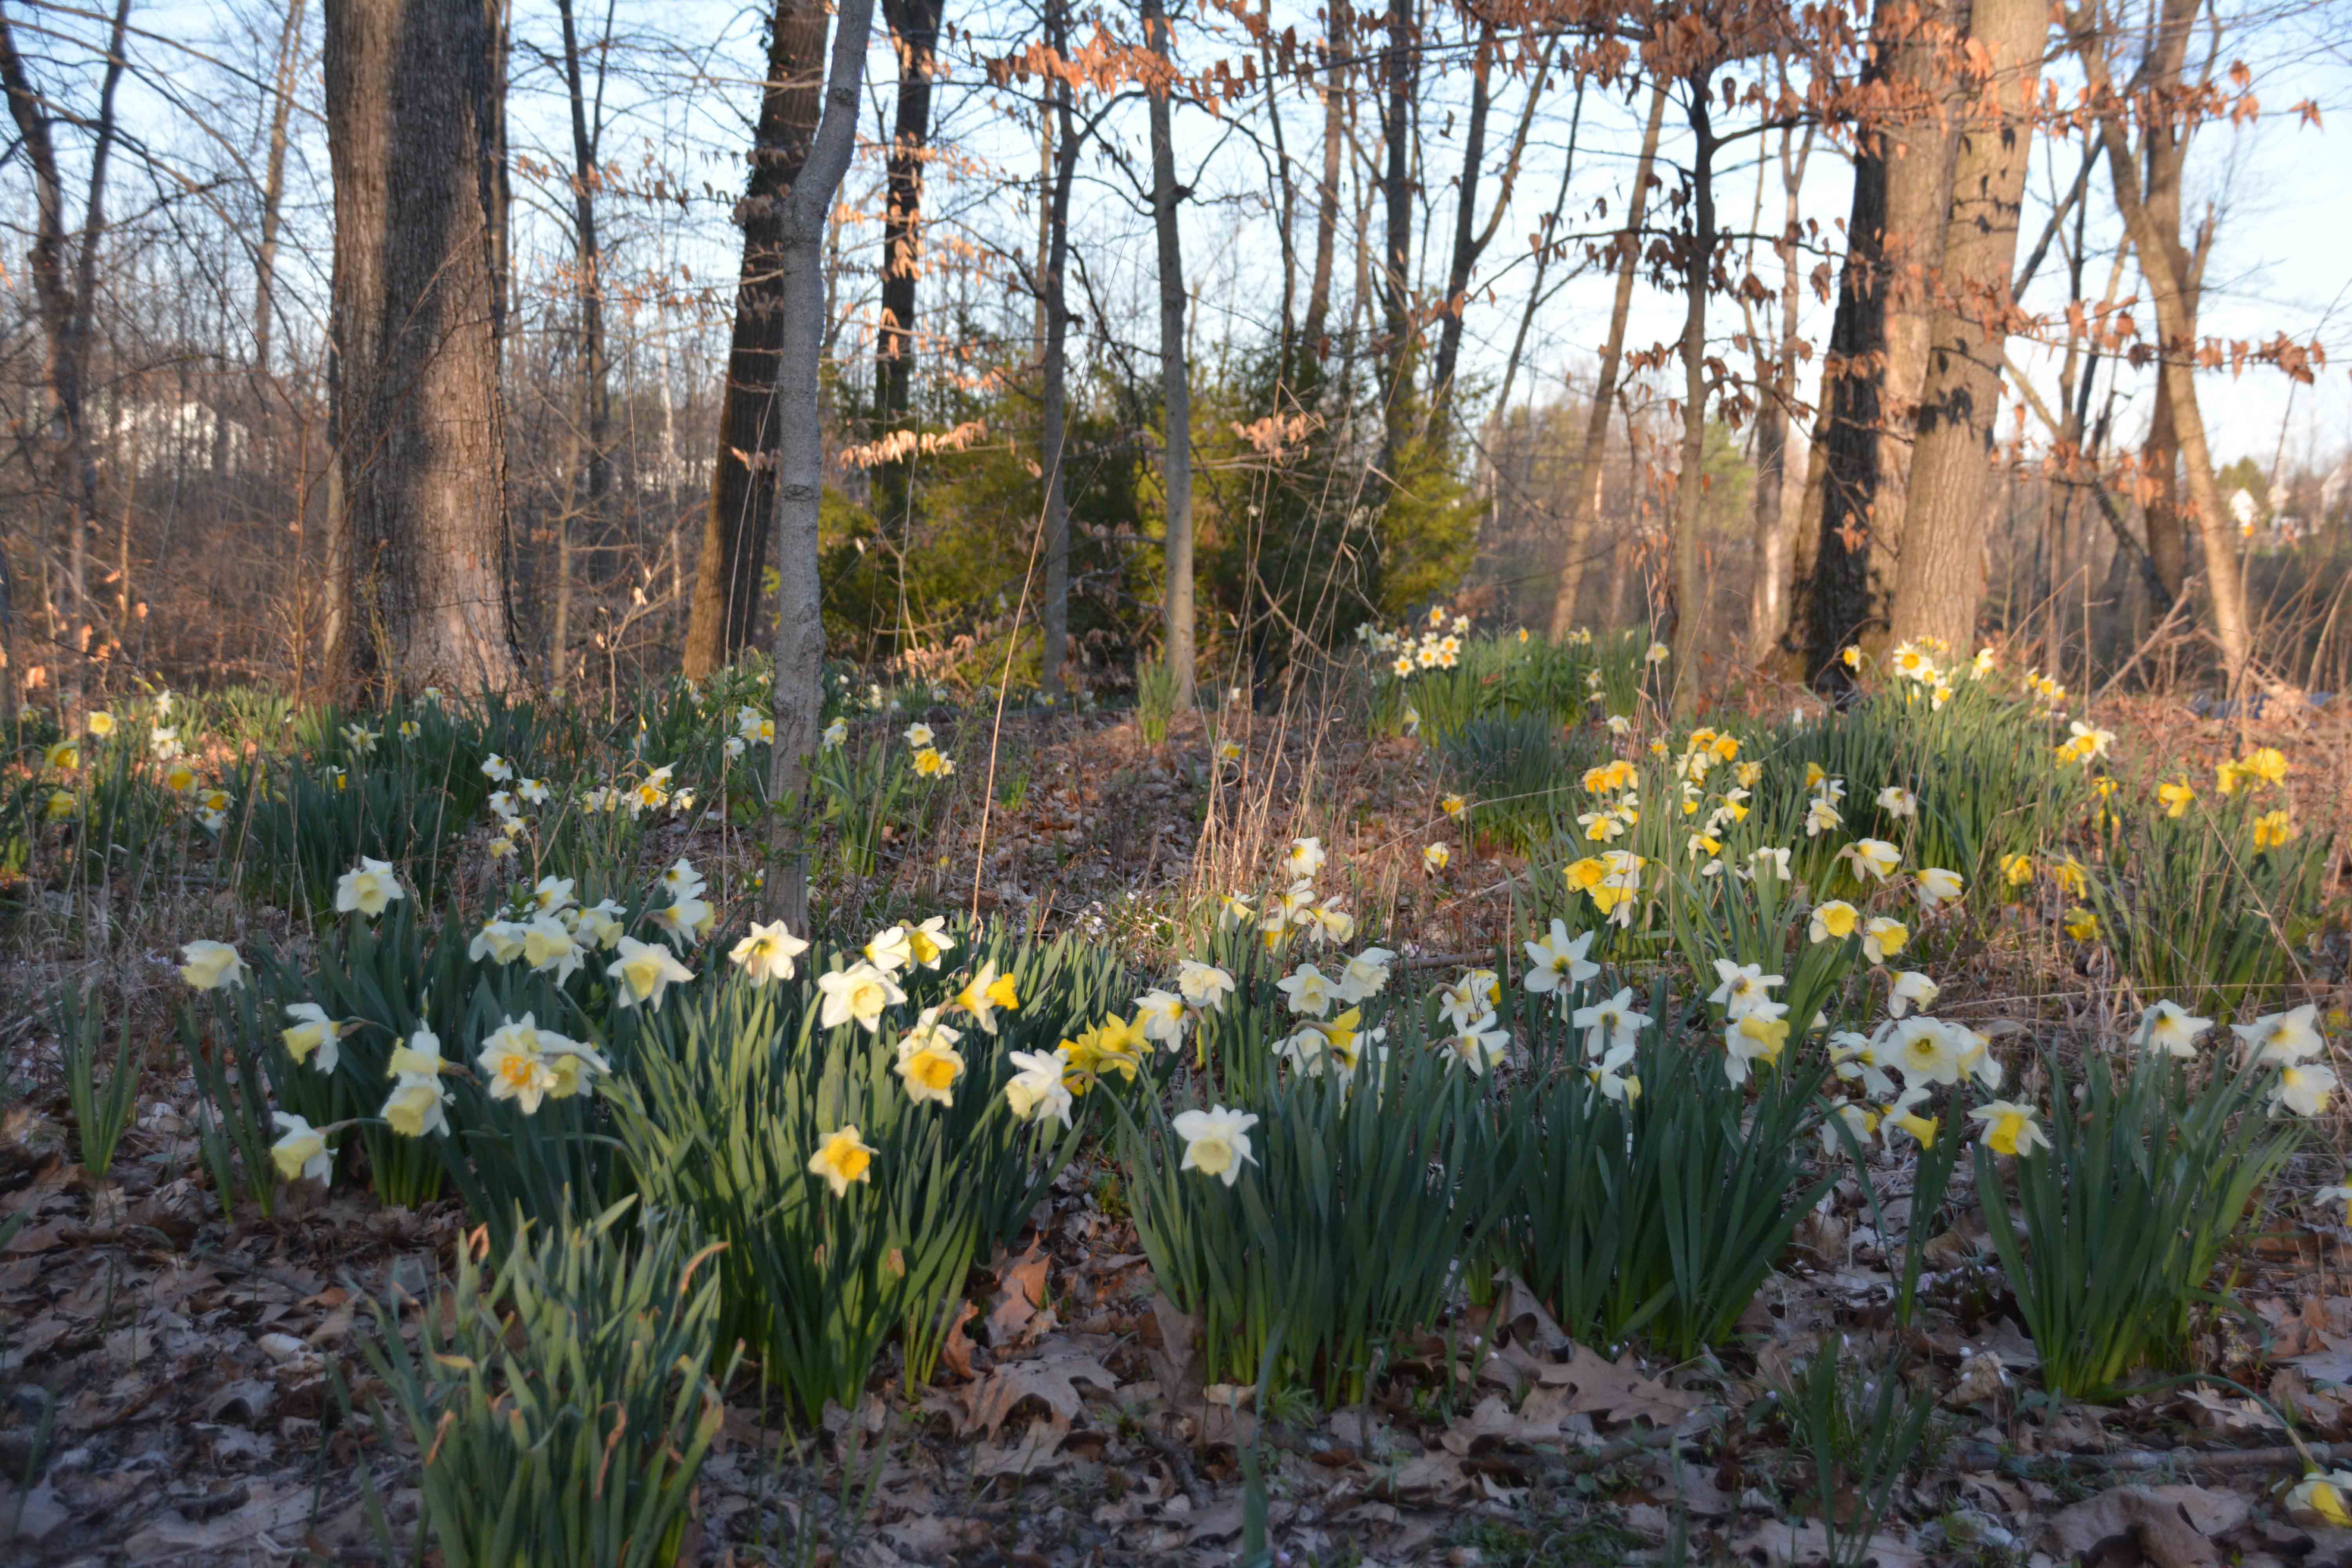 images above feature multiple groupings of naturalized daffodils in a woodland setting. These bulbs have been planted for 20 plus years and have spread in sporadic clumps with multiple varieties nesting together. As these daffodils foliage beings to die back, the other ground covers take over. More at thinkingoutsidetheboxwood.com